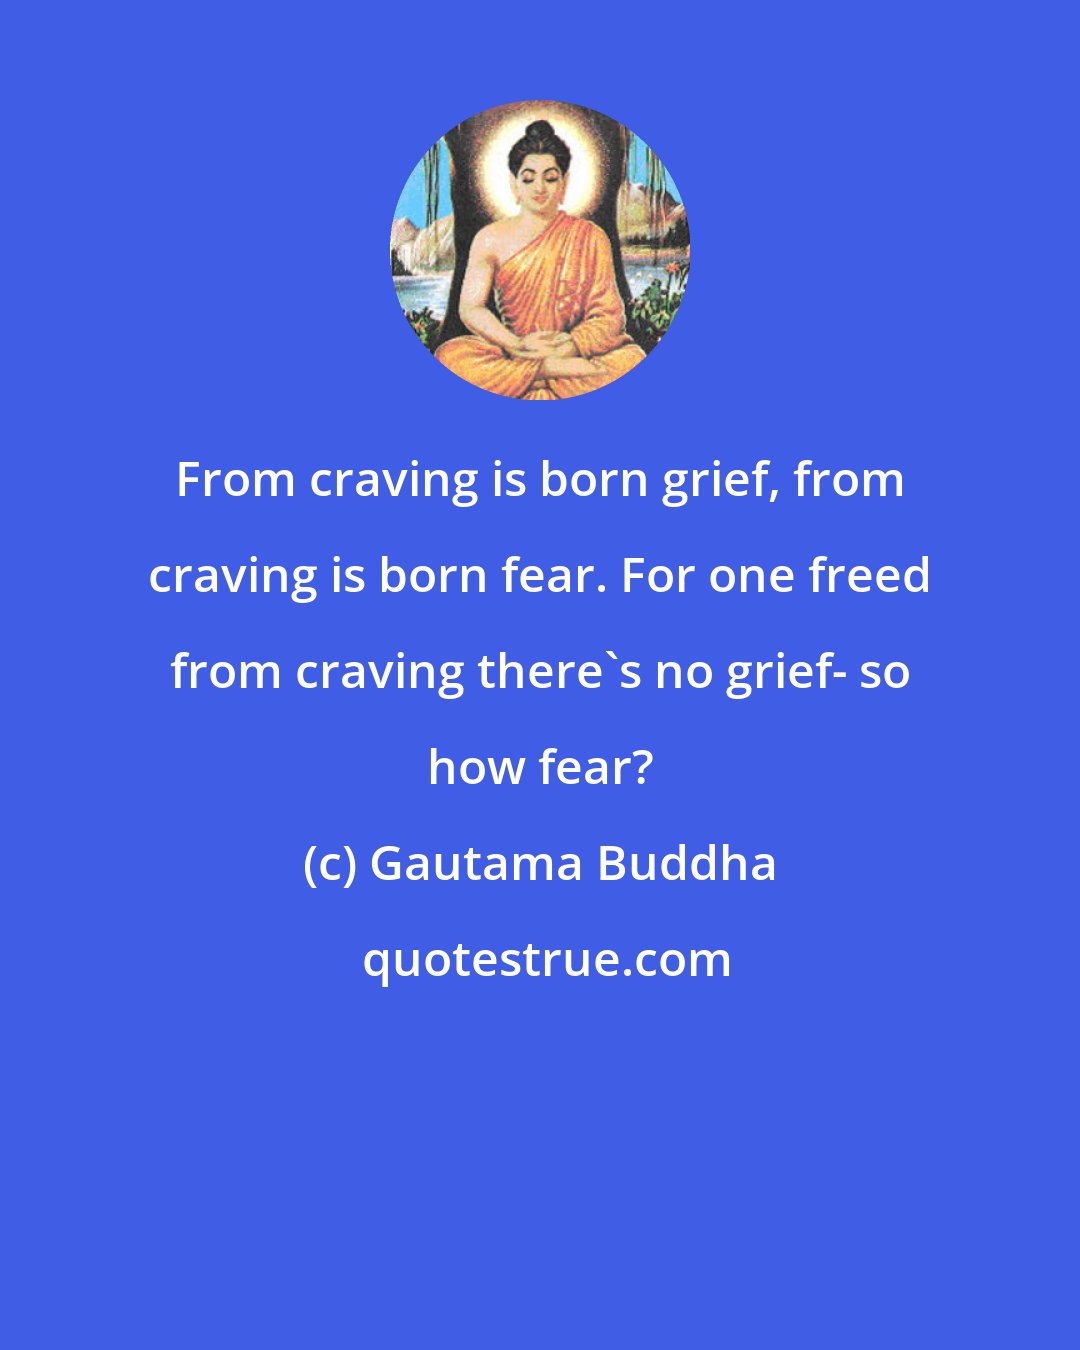 Gautama Buddha: From craving is born grief, from craving is born fear. For one freed from craving there's no grief- so how fear?